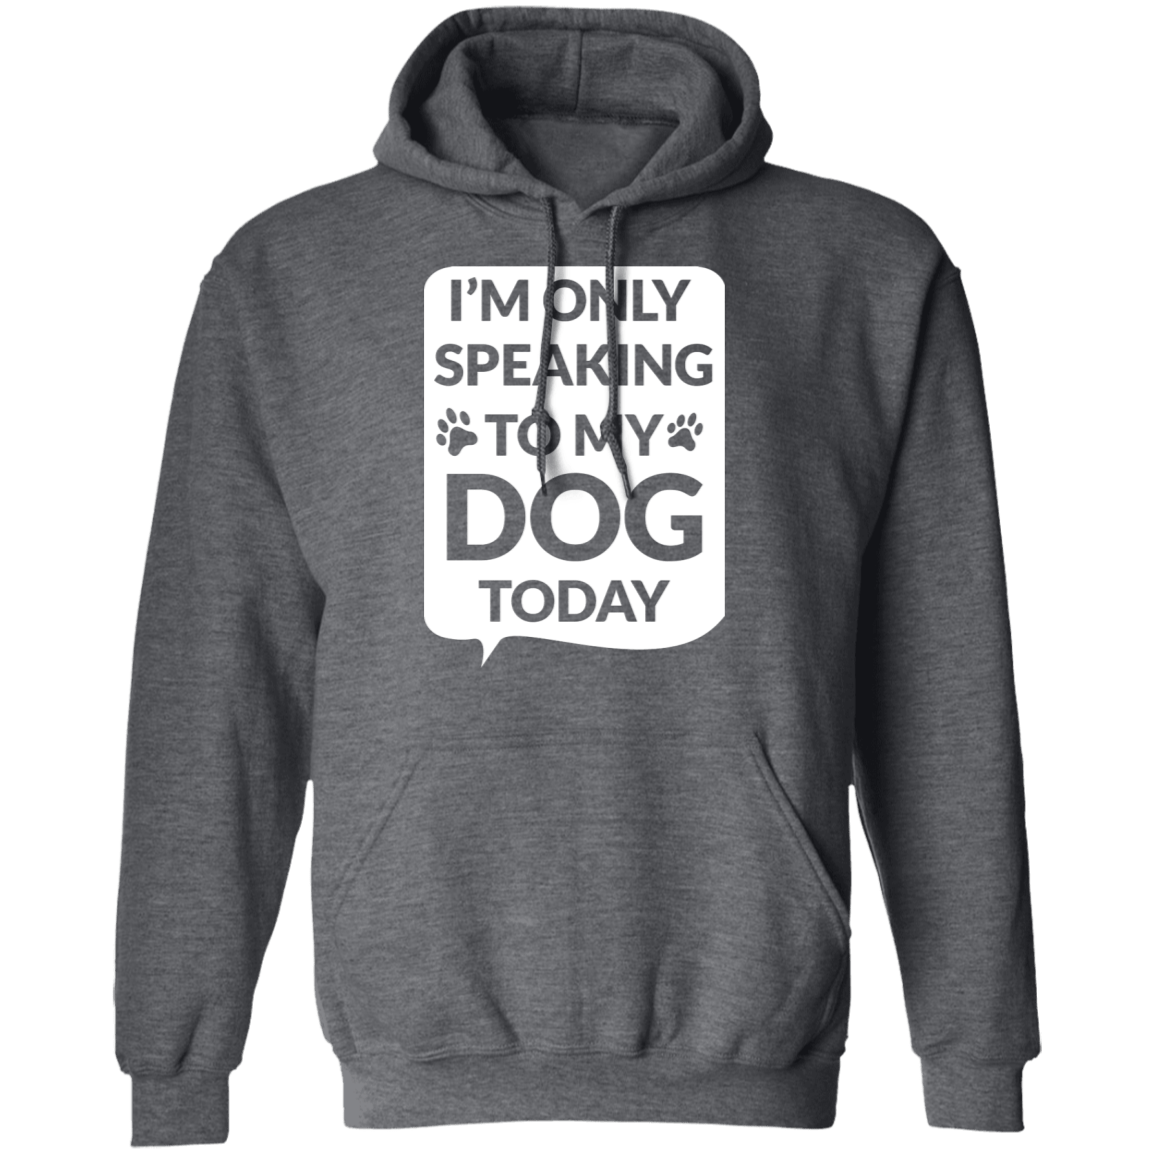 I'm Only Speaking To My Dog Today - Hoodie.